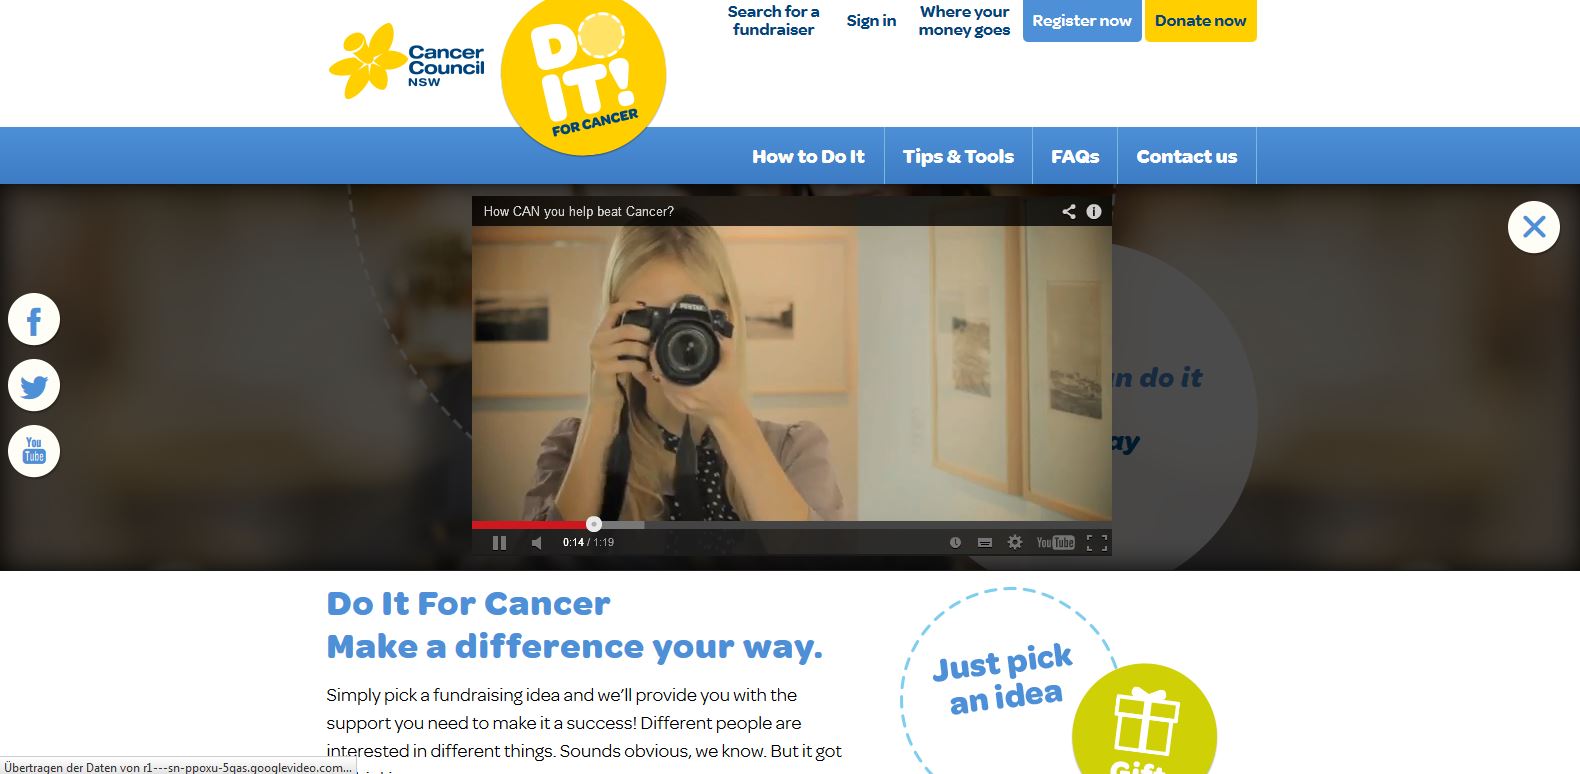 Do it for cancer - Video overlay